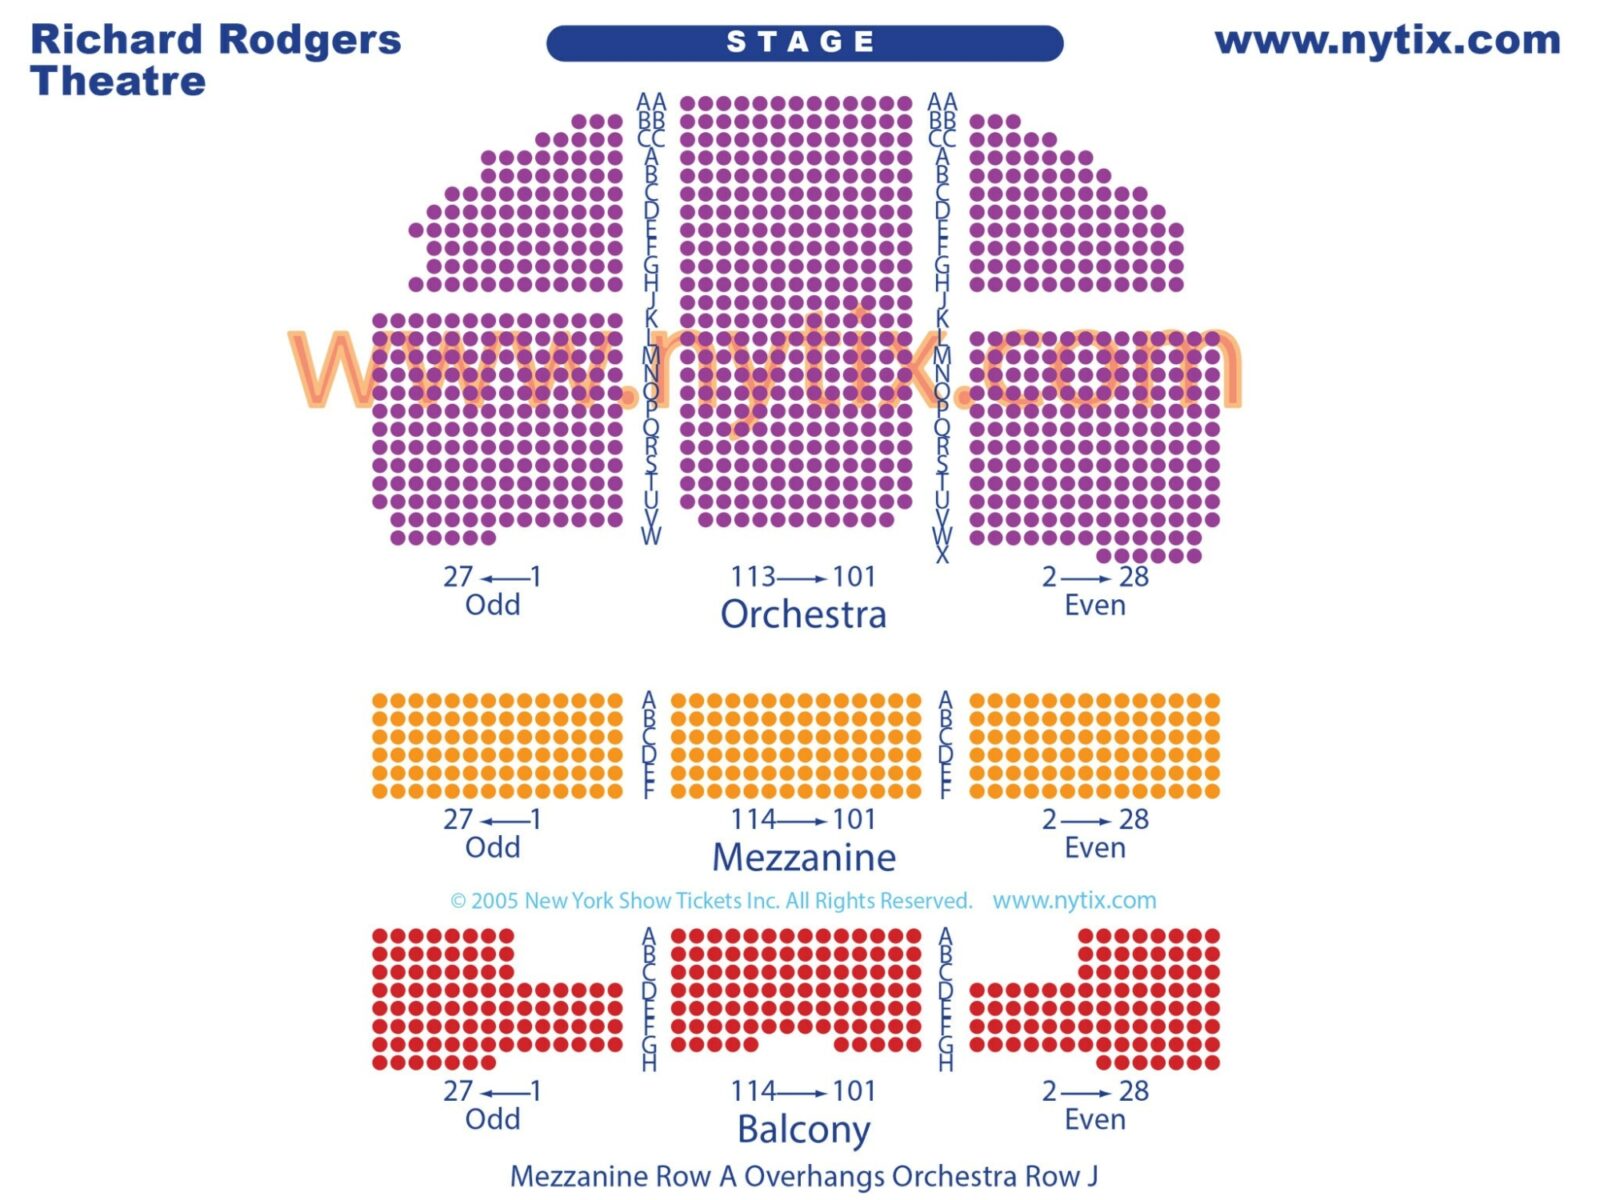 Richard Rogers Theater Seating Chart